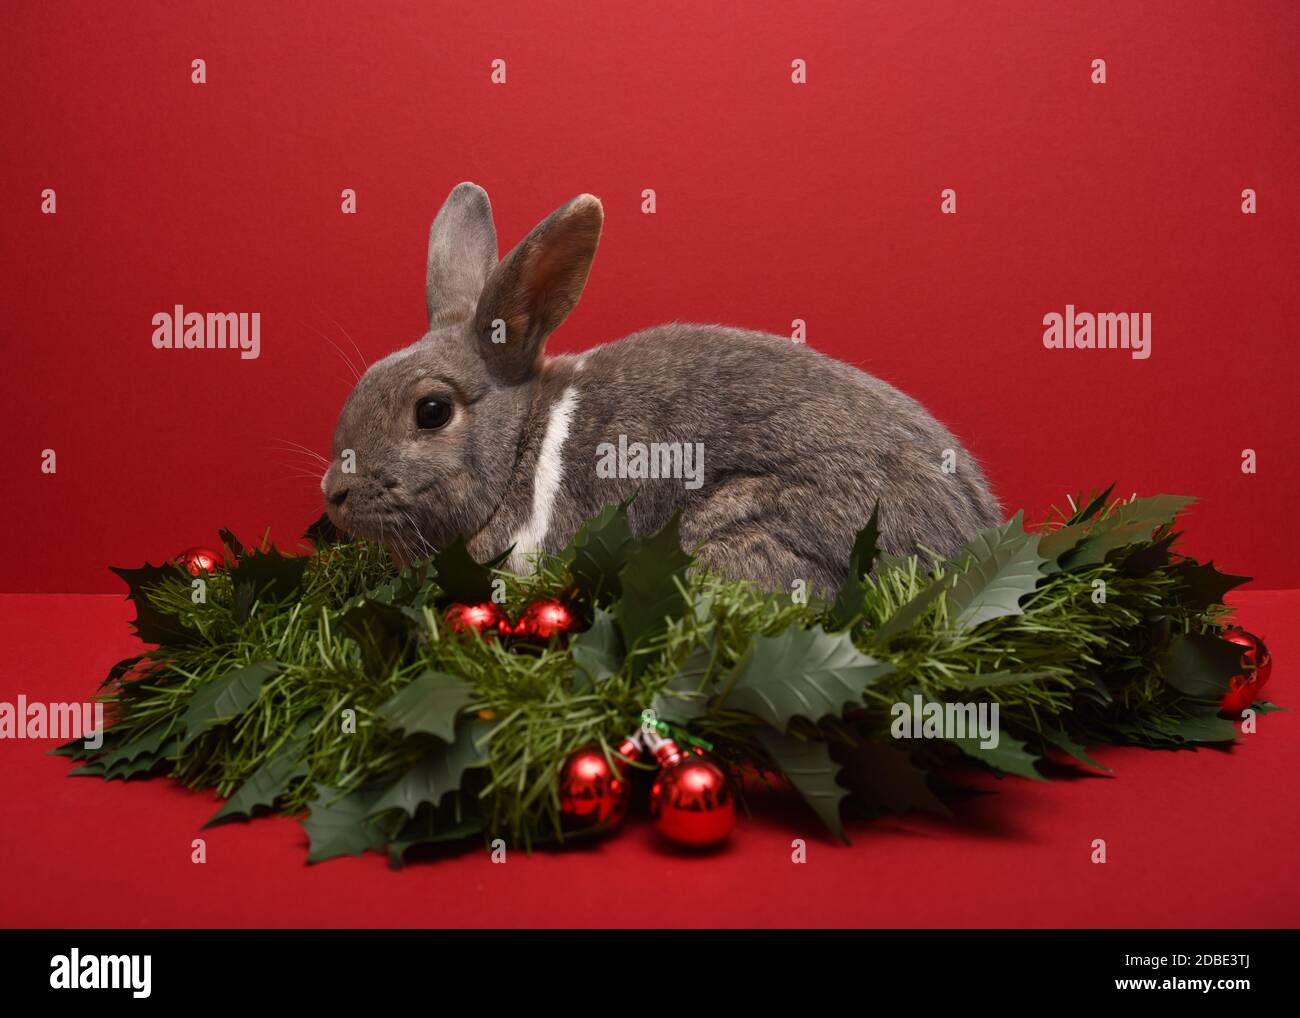 Photograph of a rabbit in a Christmas garland Stock Photo